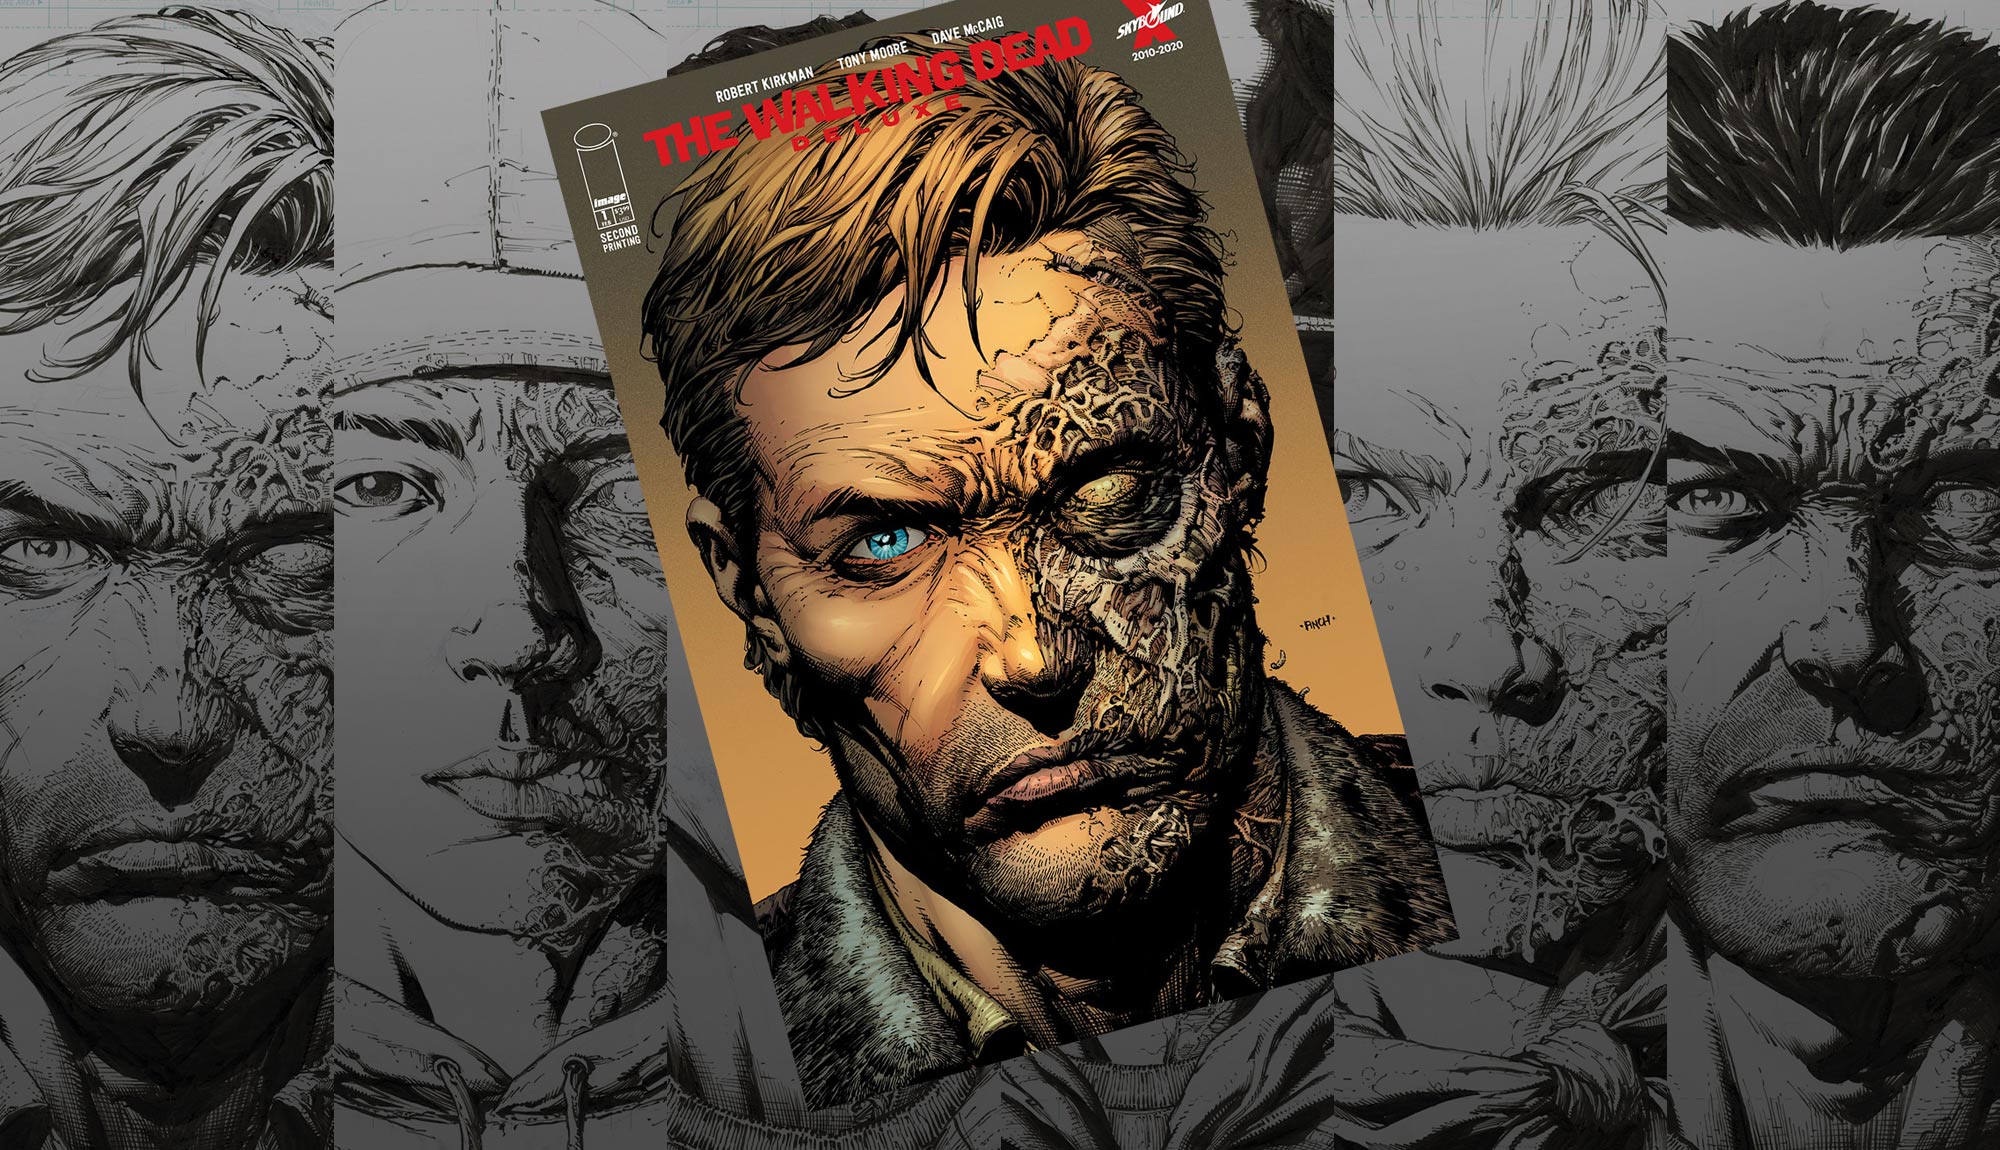 THE WALKING DEAD DELUXE #1-6 Reprints Get Brand New Covers